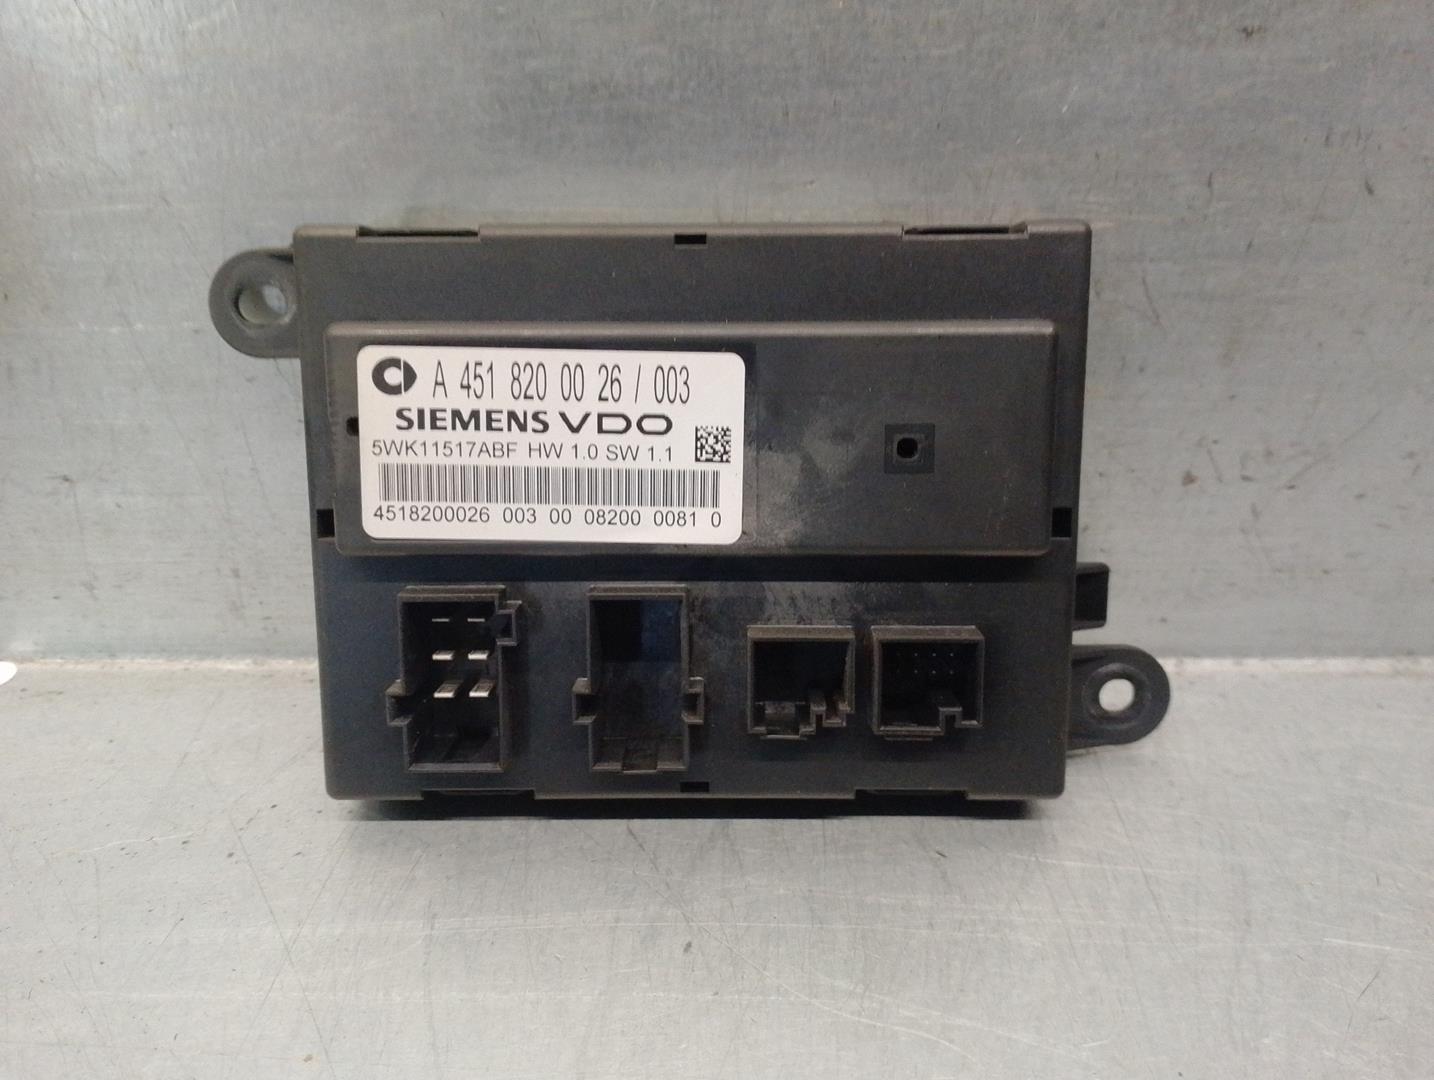 SMART Fortwo 2 generation (2007-2015) Other Control Units A4518200026, 5WK11517ABF, SIEMENSVDO 24187158